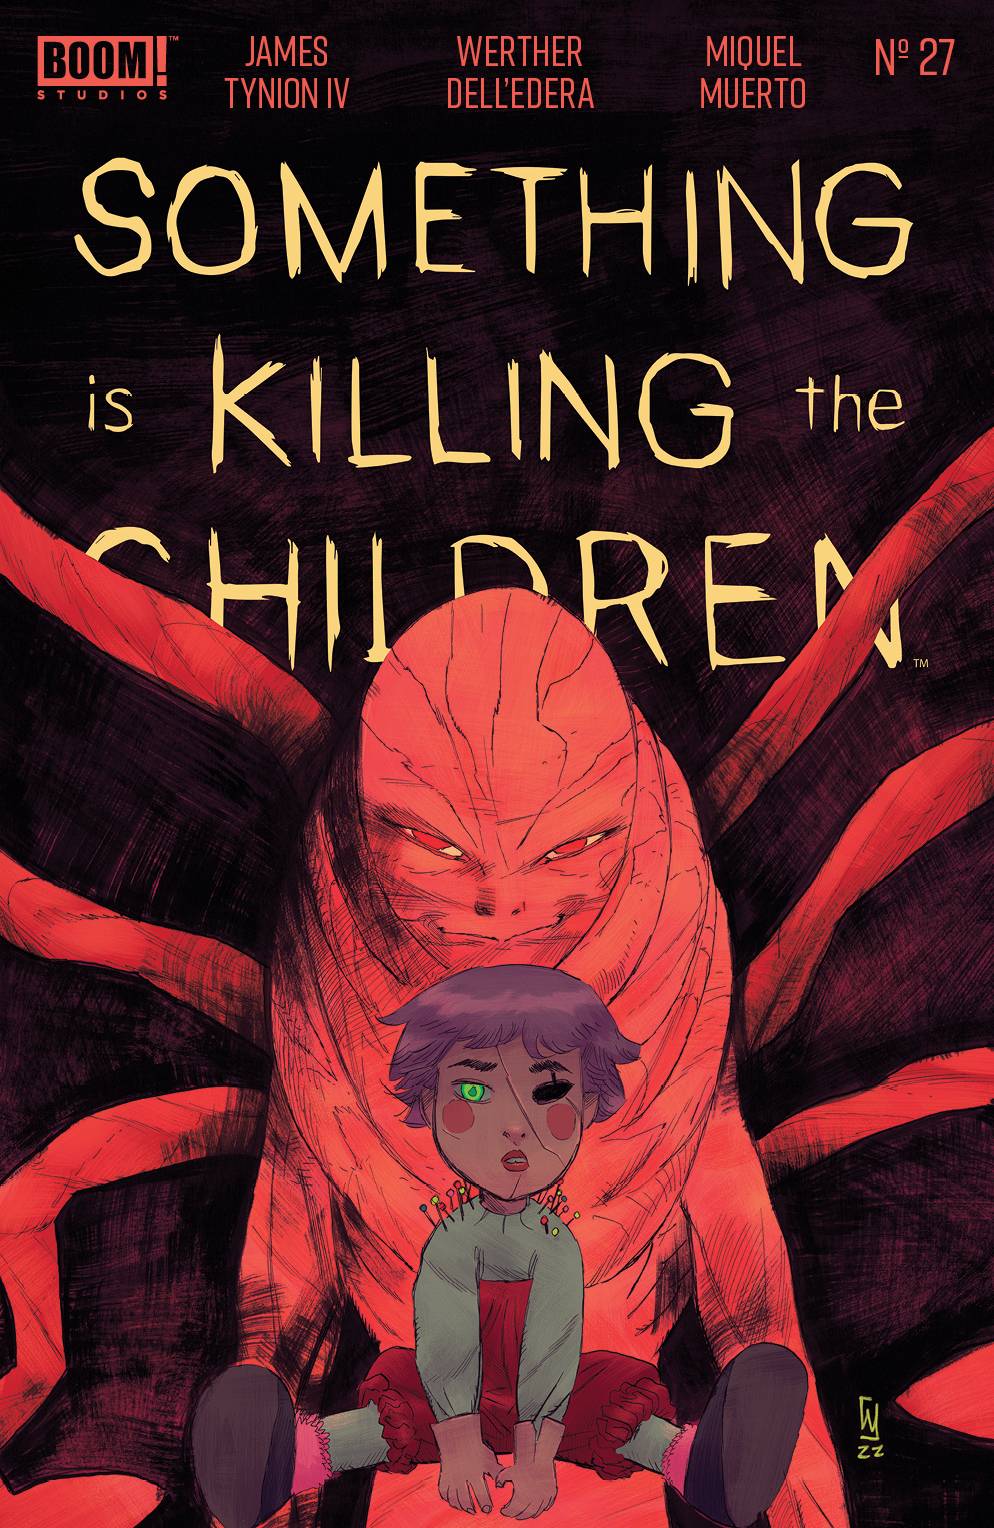 OCT220305 - SOMETHING IS KILLING THE CHILDREN #27 CVR A DELL EDERA -  Previews World